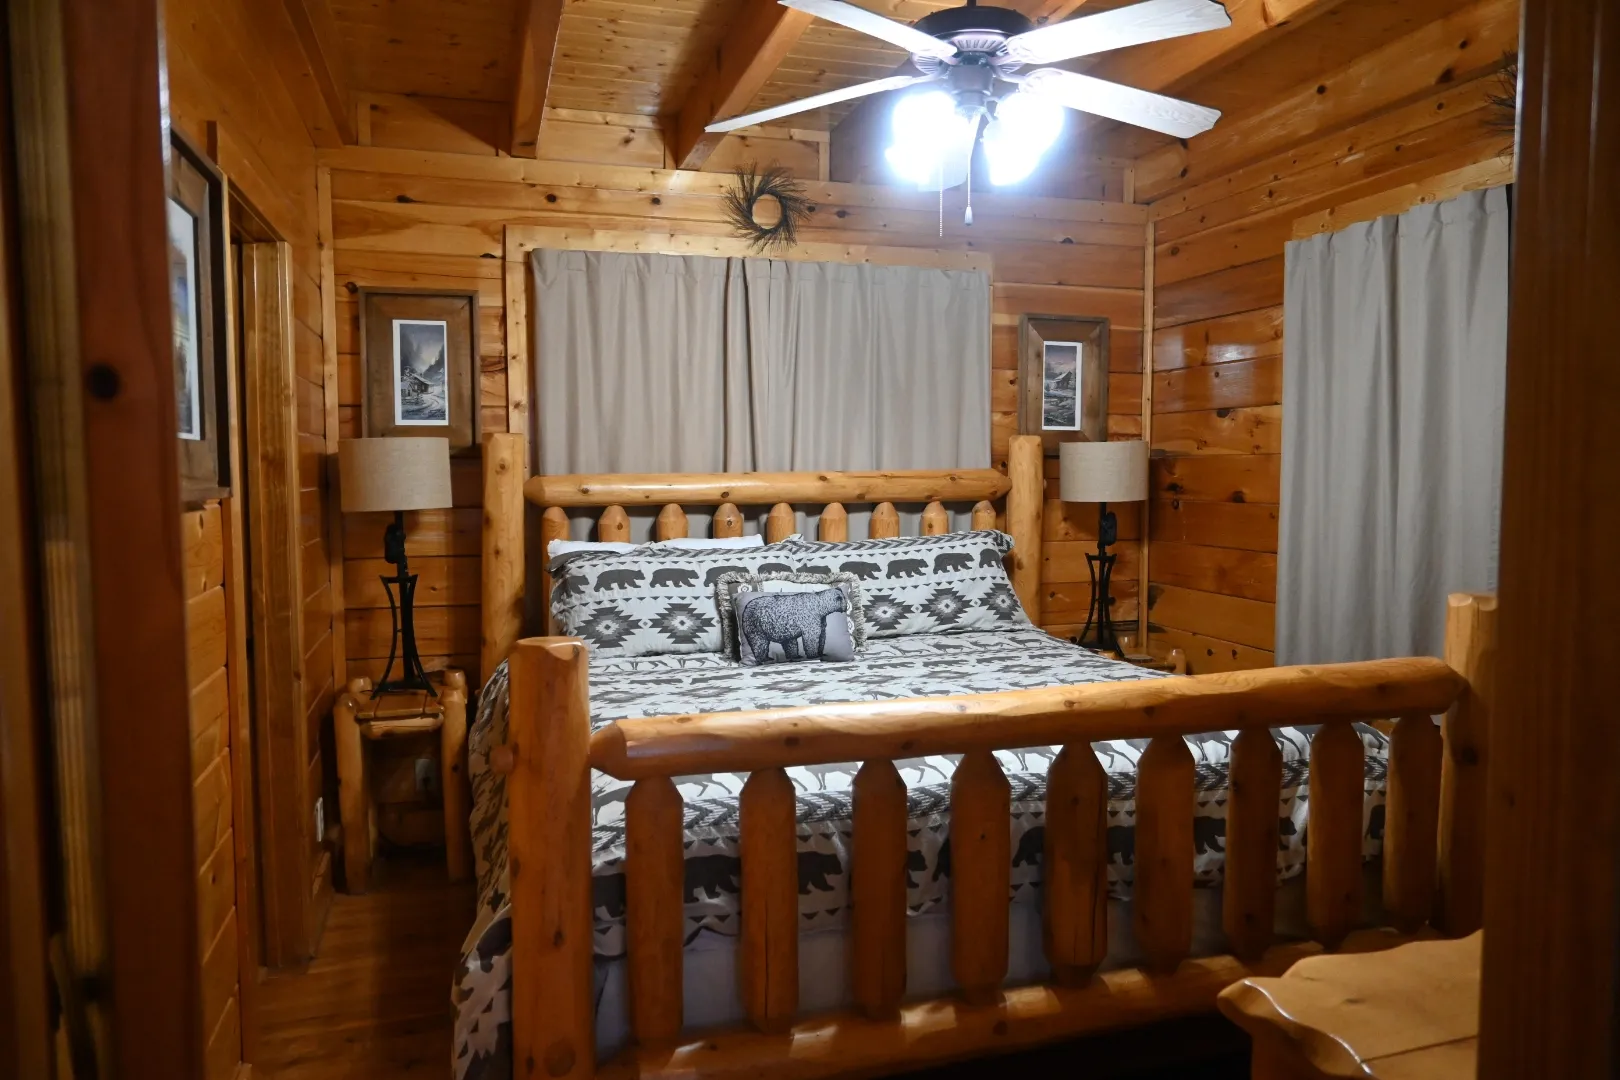 Staying in a Log Cabin in Sevierville, TN